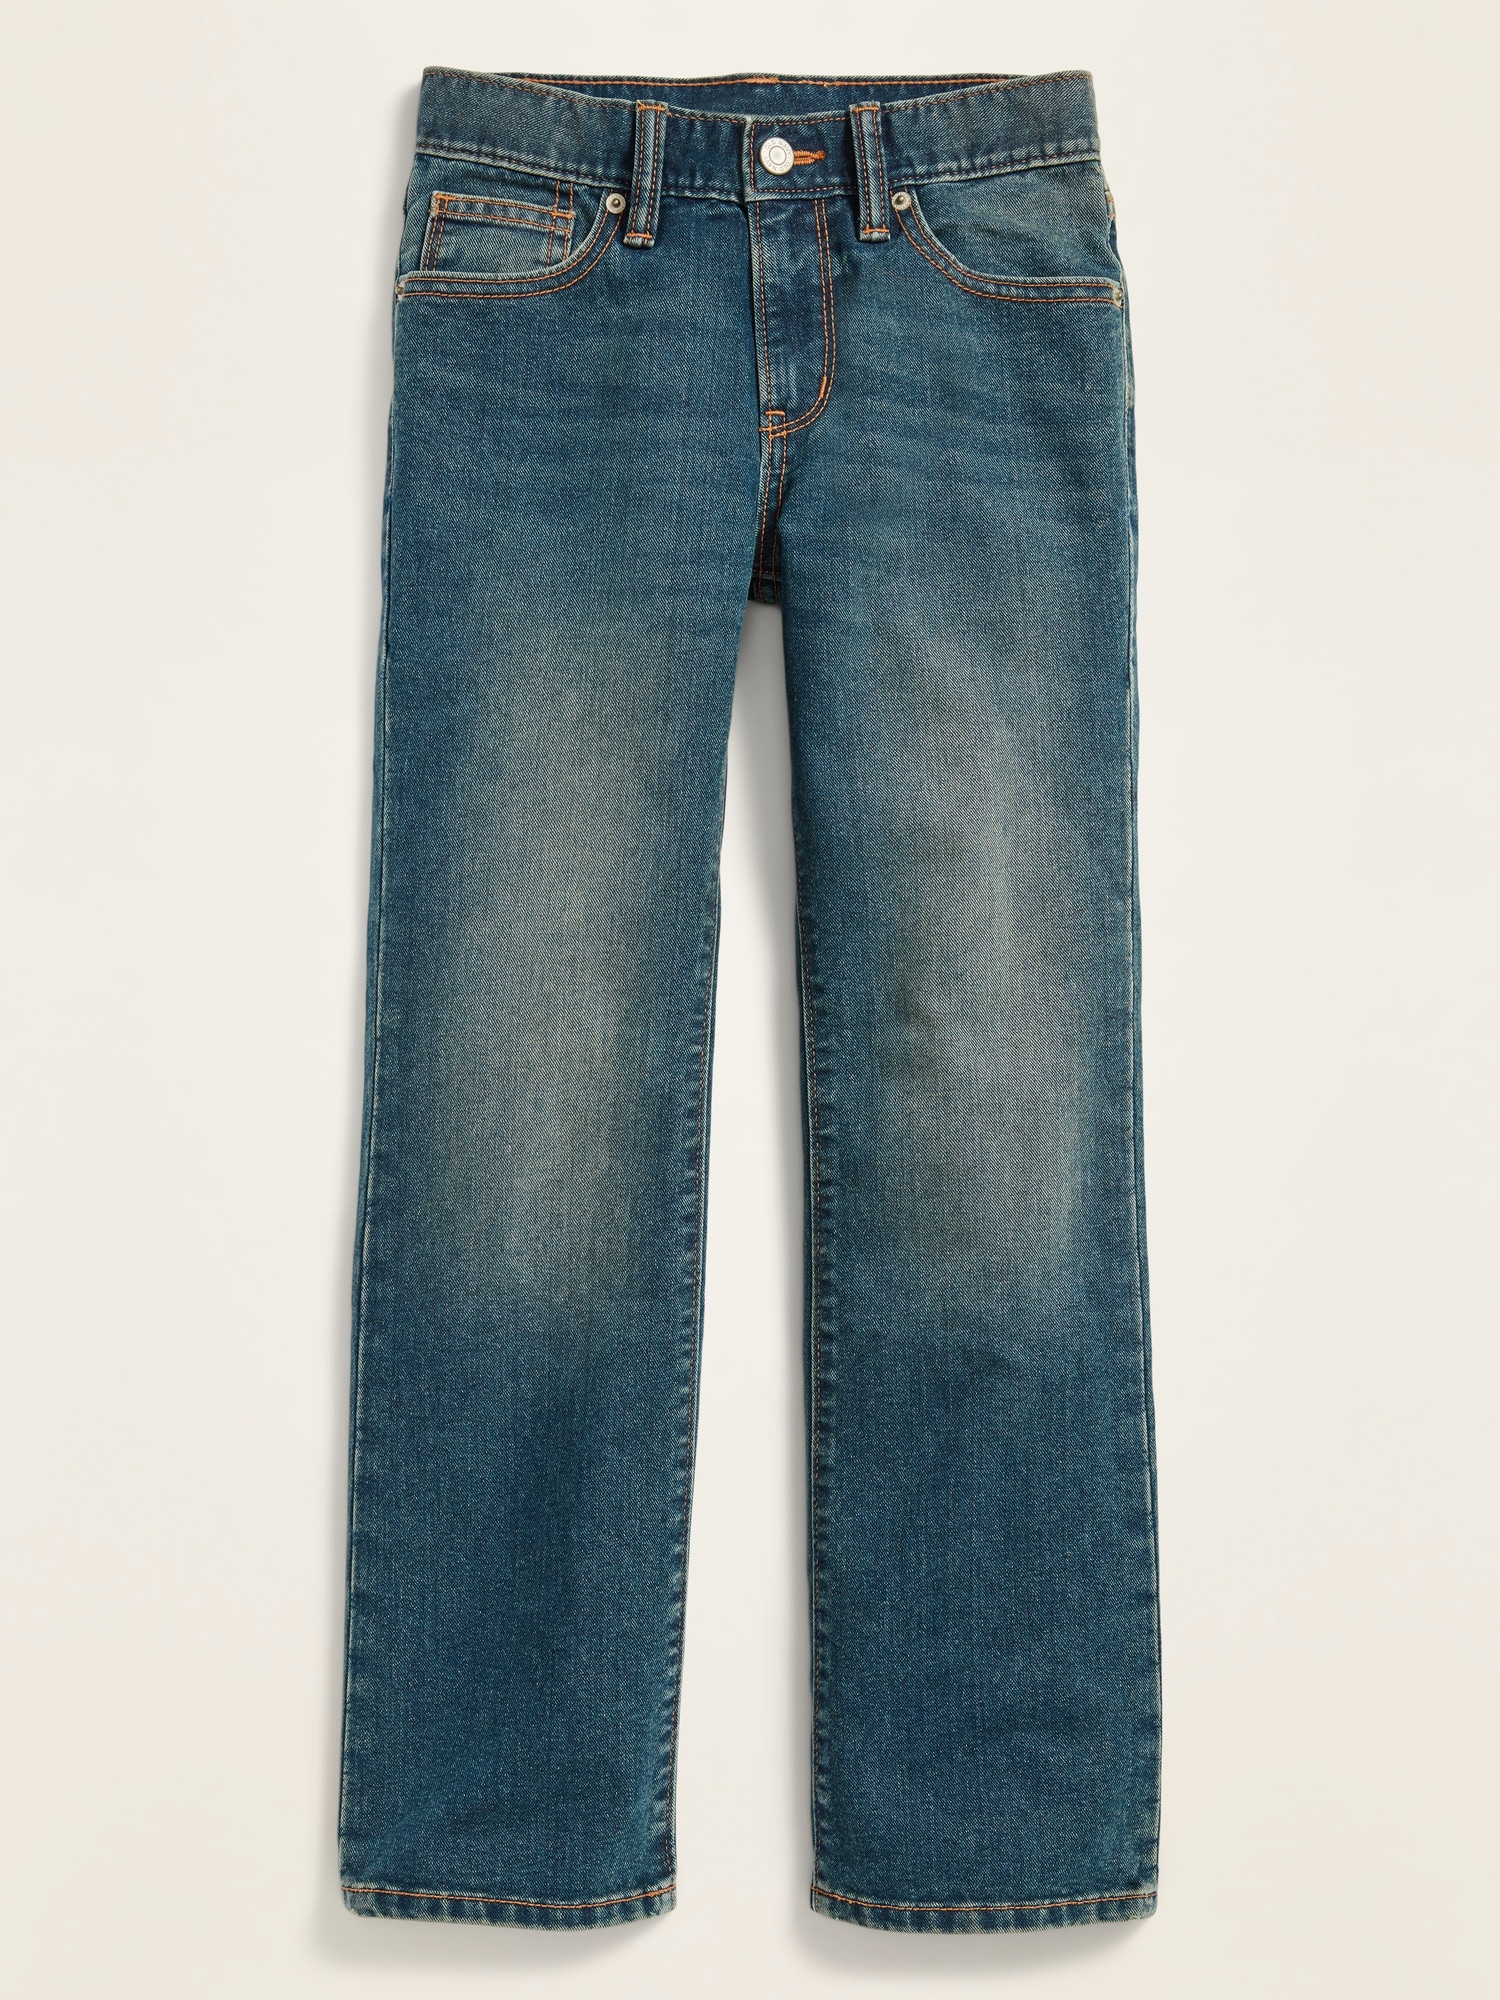 Boot-Cut Jeans For Boys | Old Navy